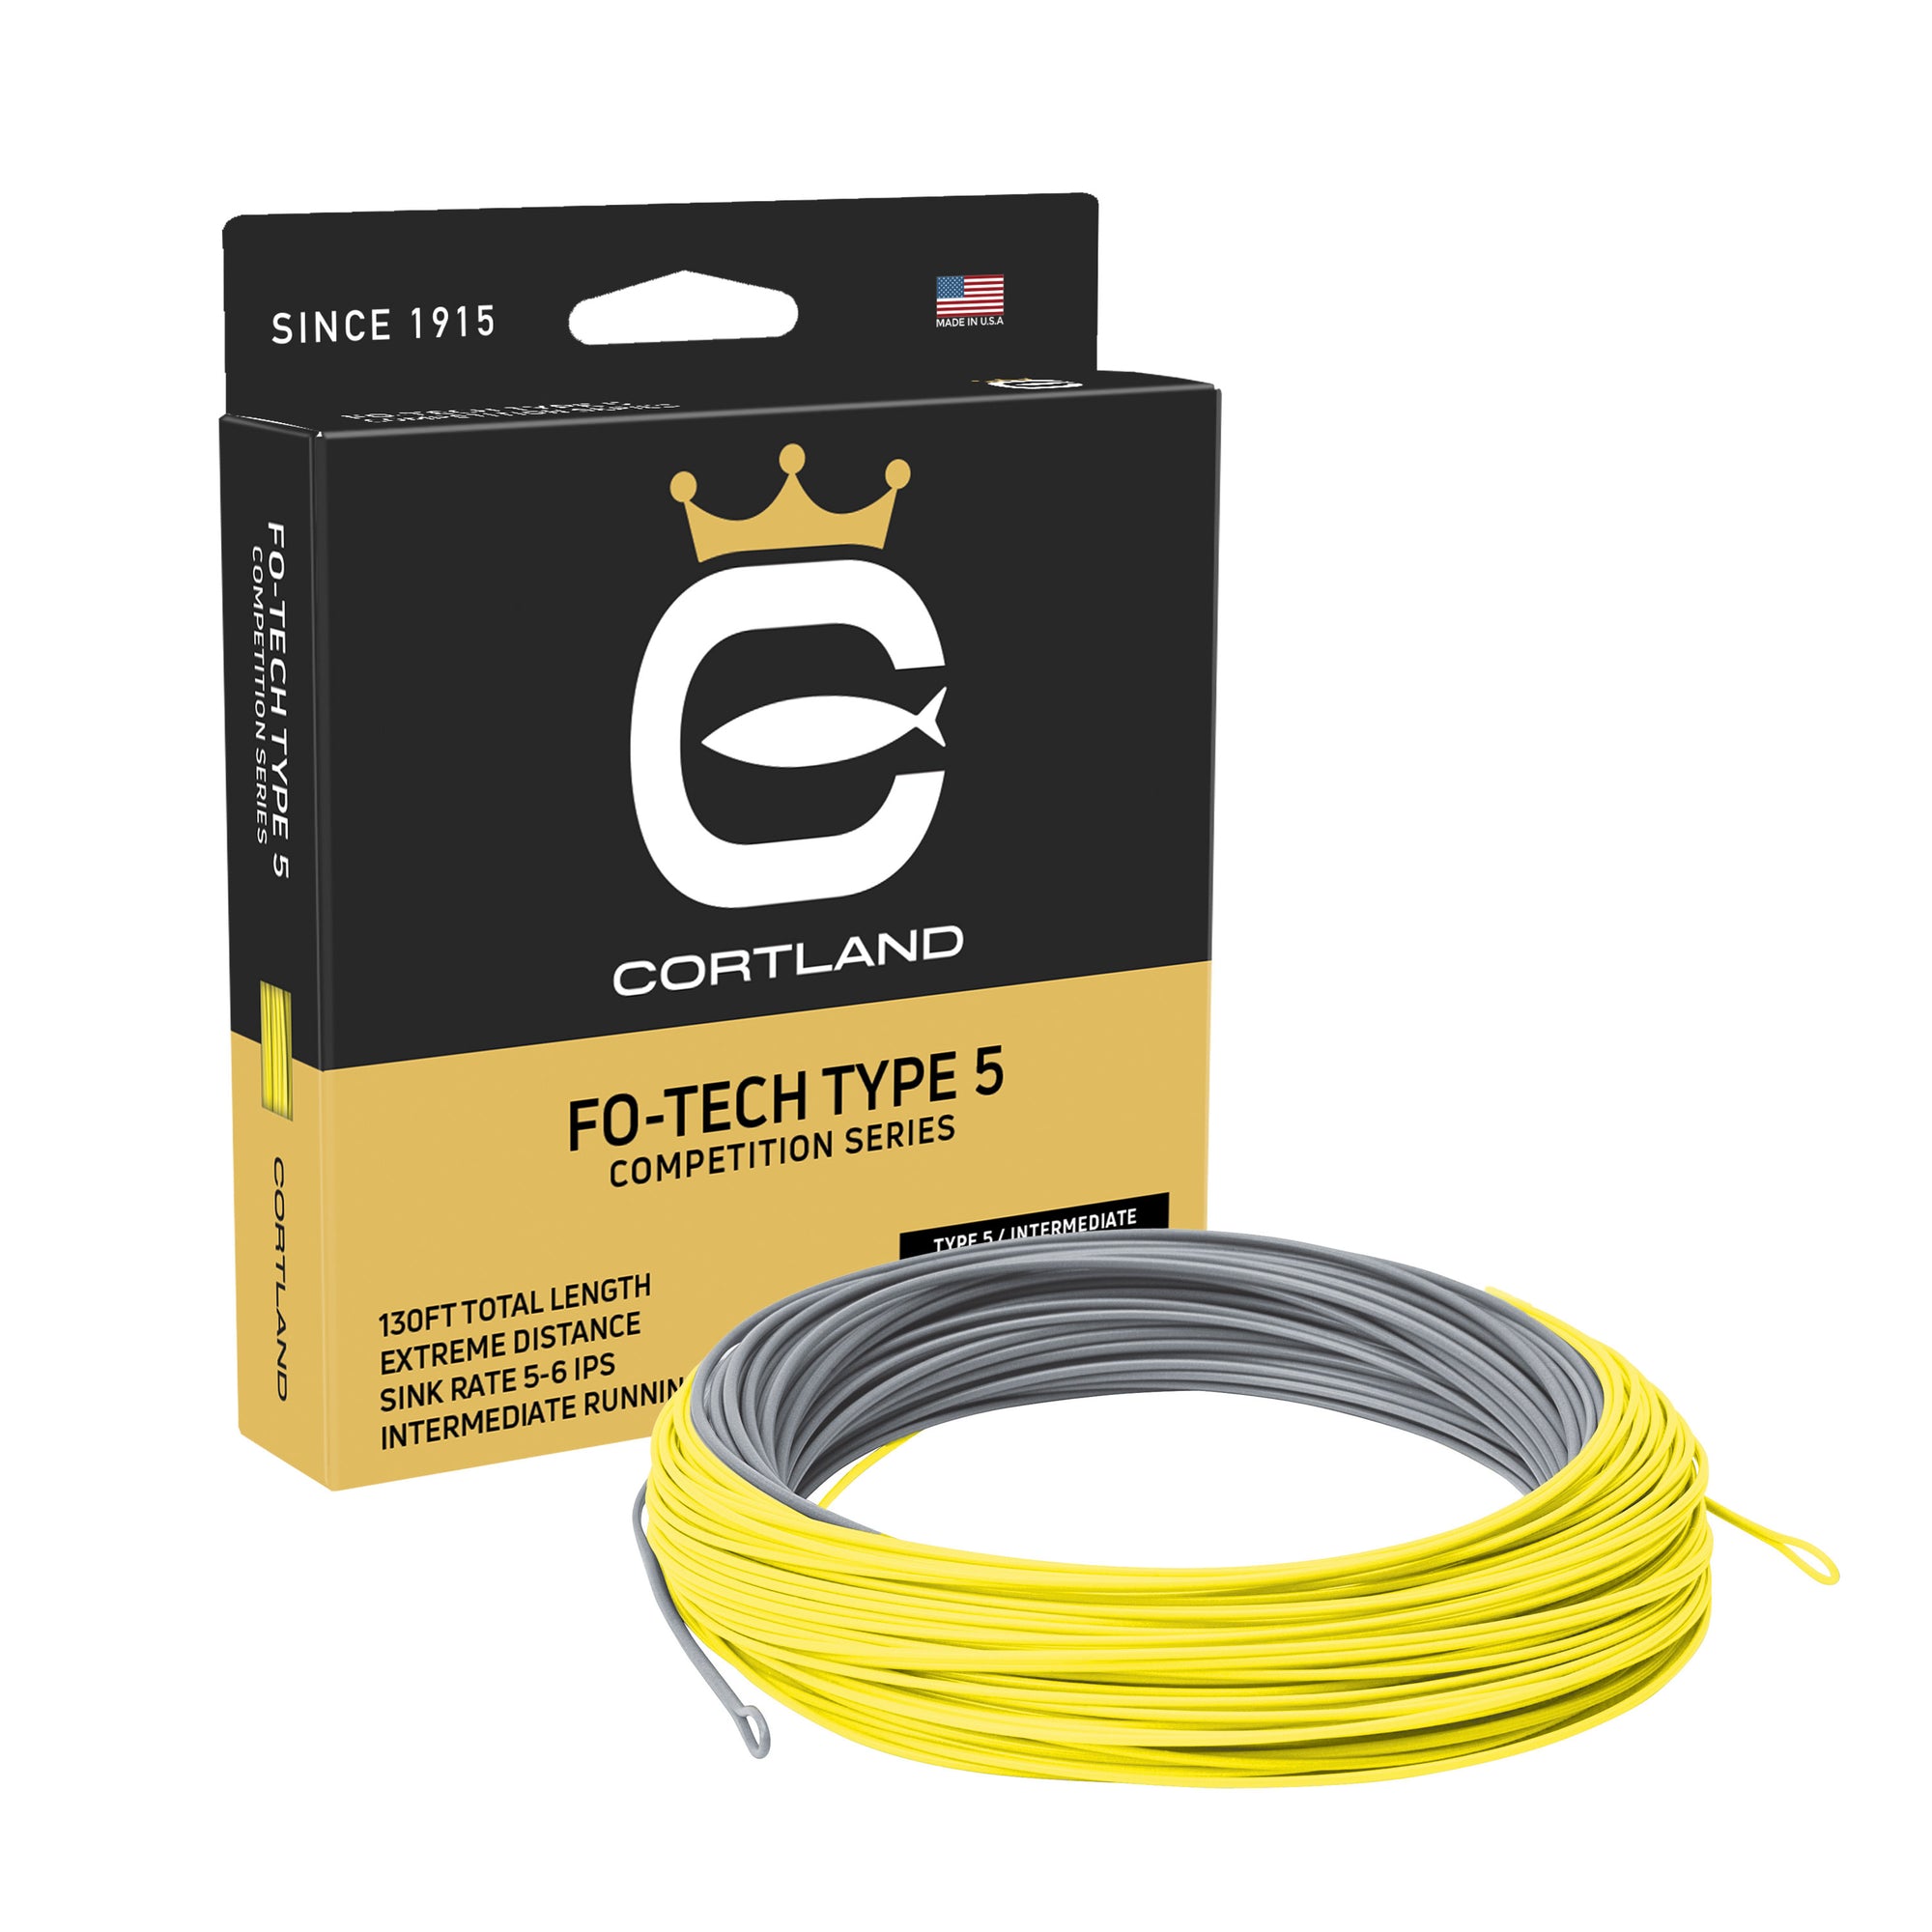 Cortland Competition FO-Tech Type 5 Fly Line - Gray/Yellow - WF6/7S/I